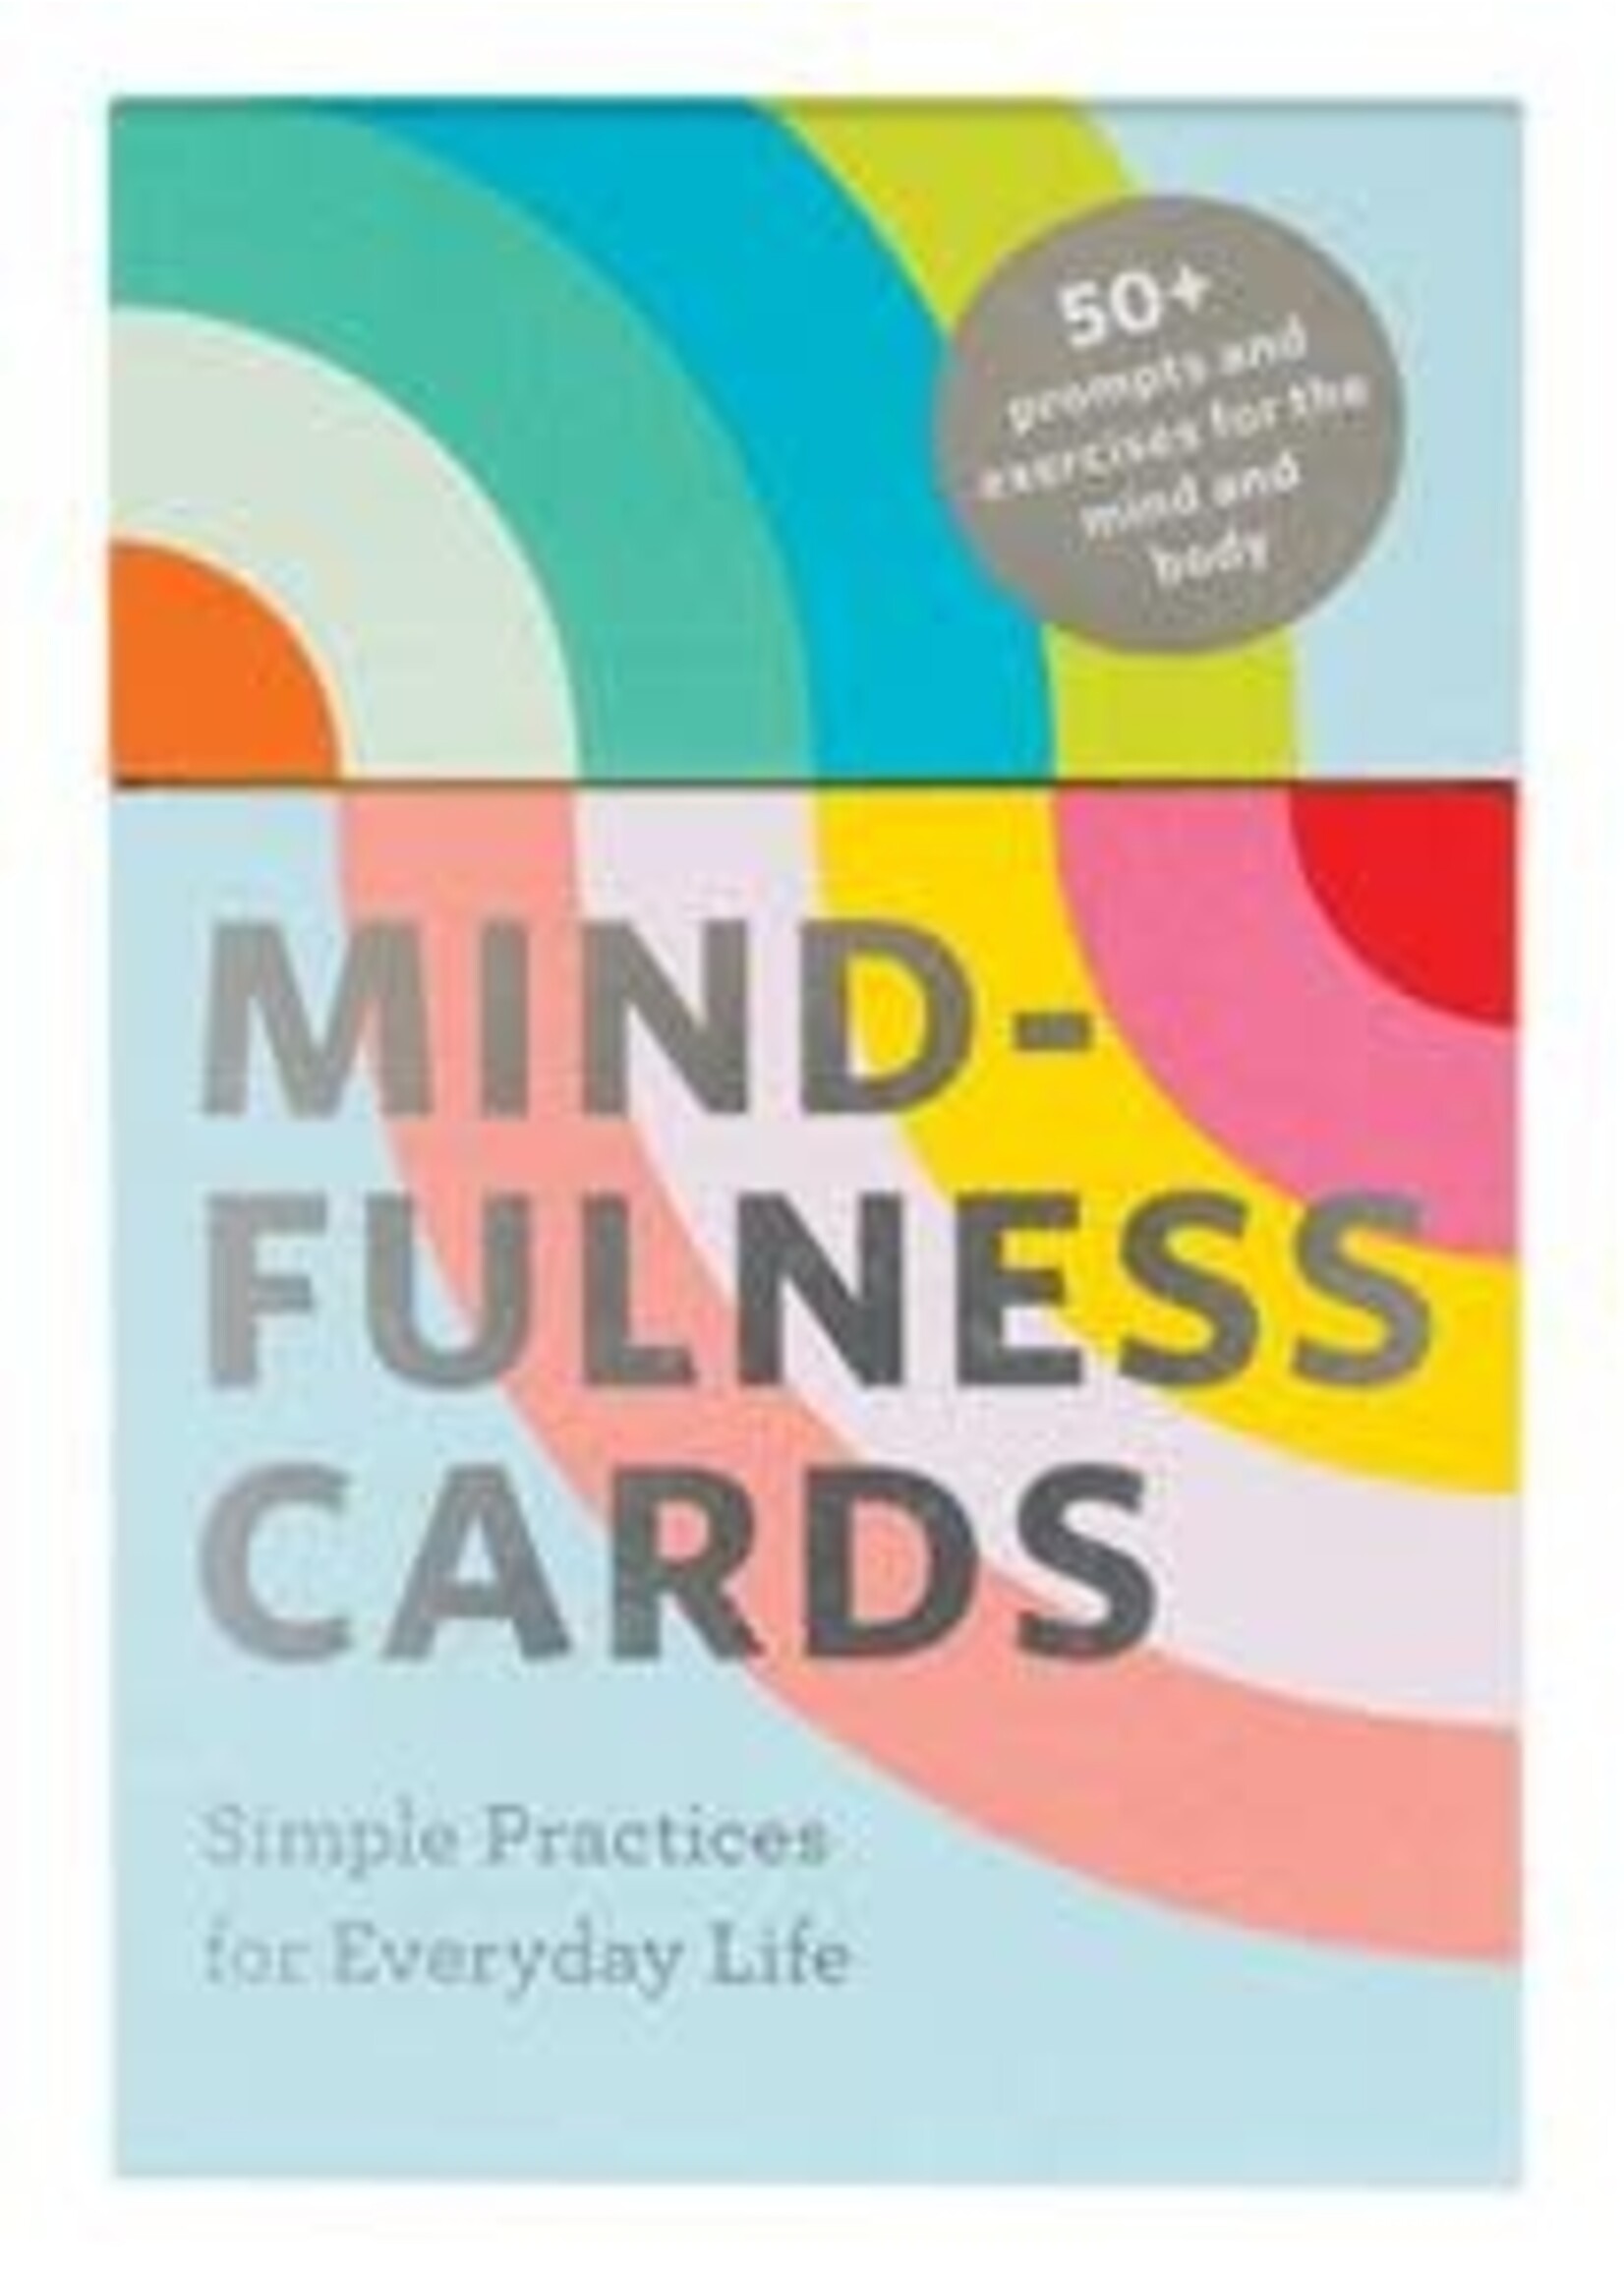 Mindfulness Cards: Simple Practices for Everyday Life by Rohan Gunatillake